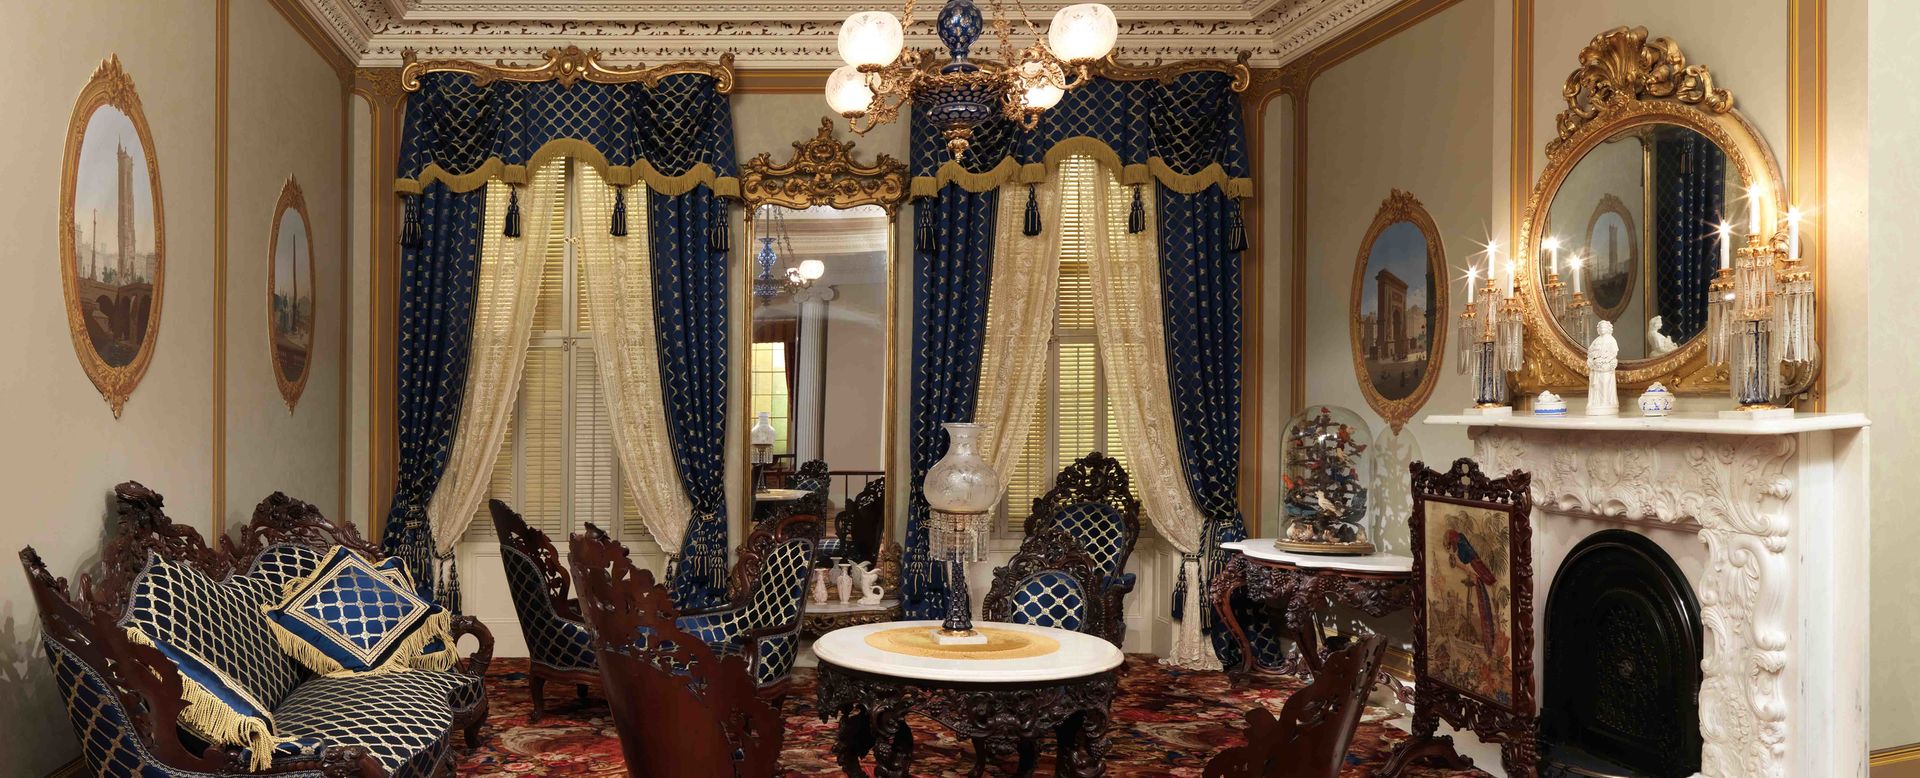 A cropped view of the Rococo Revival Parlor as installed in the American Wing at the Metropolitan Museum of Art.